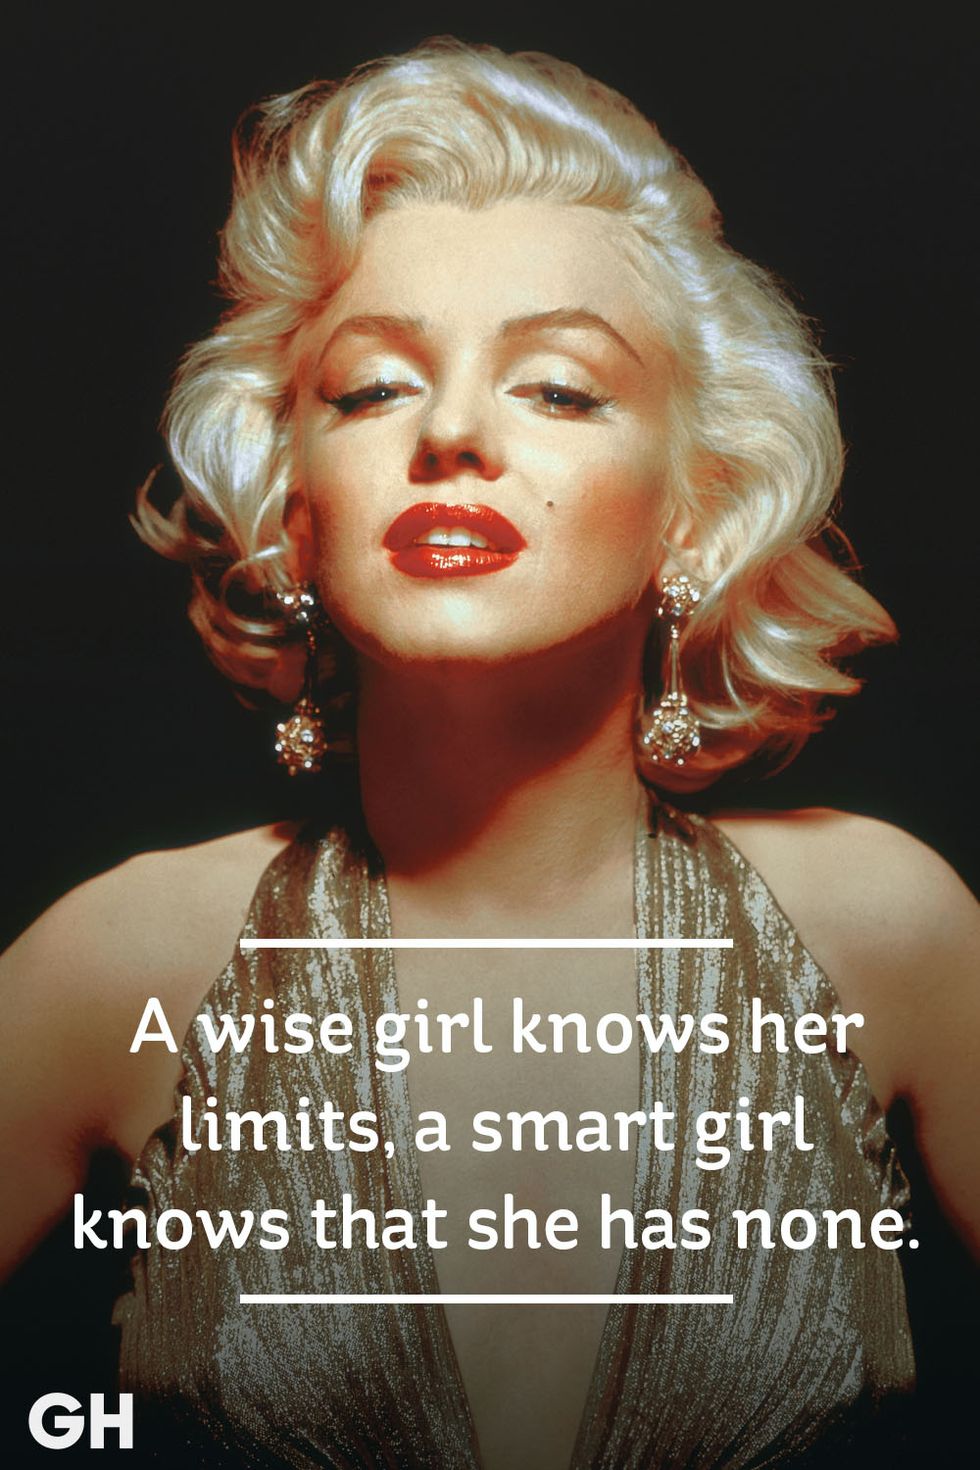 Marilyn Monroe - Quotes, Movies & Death